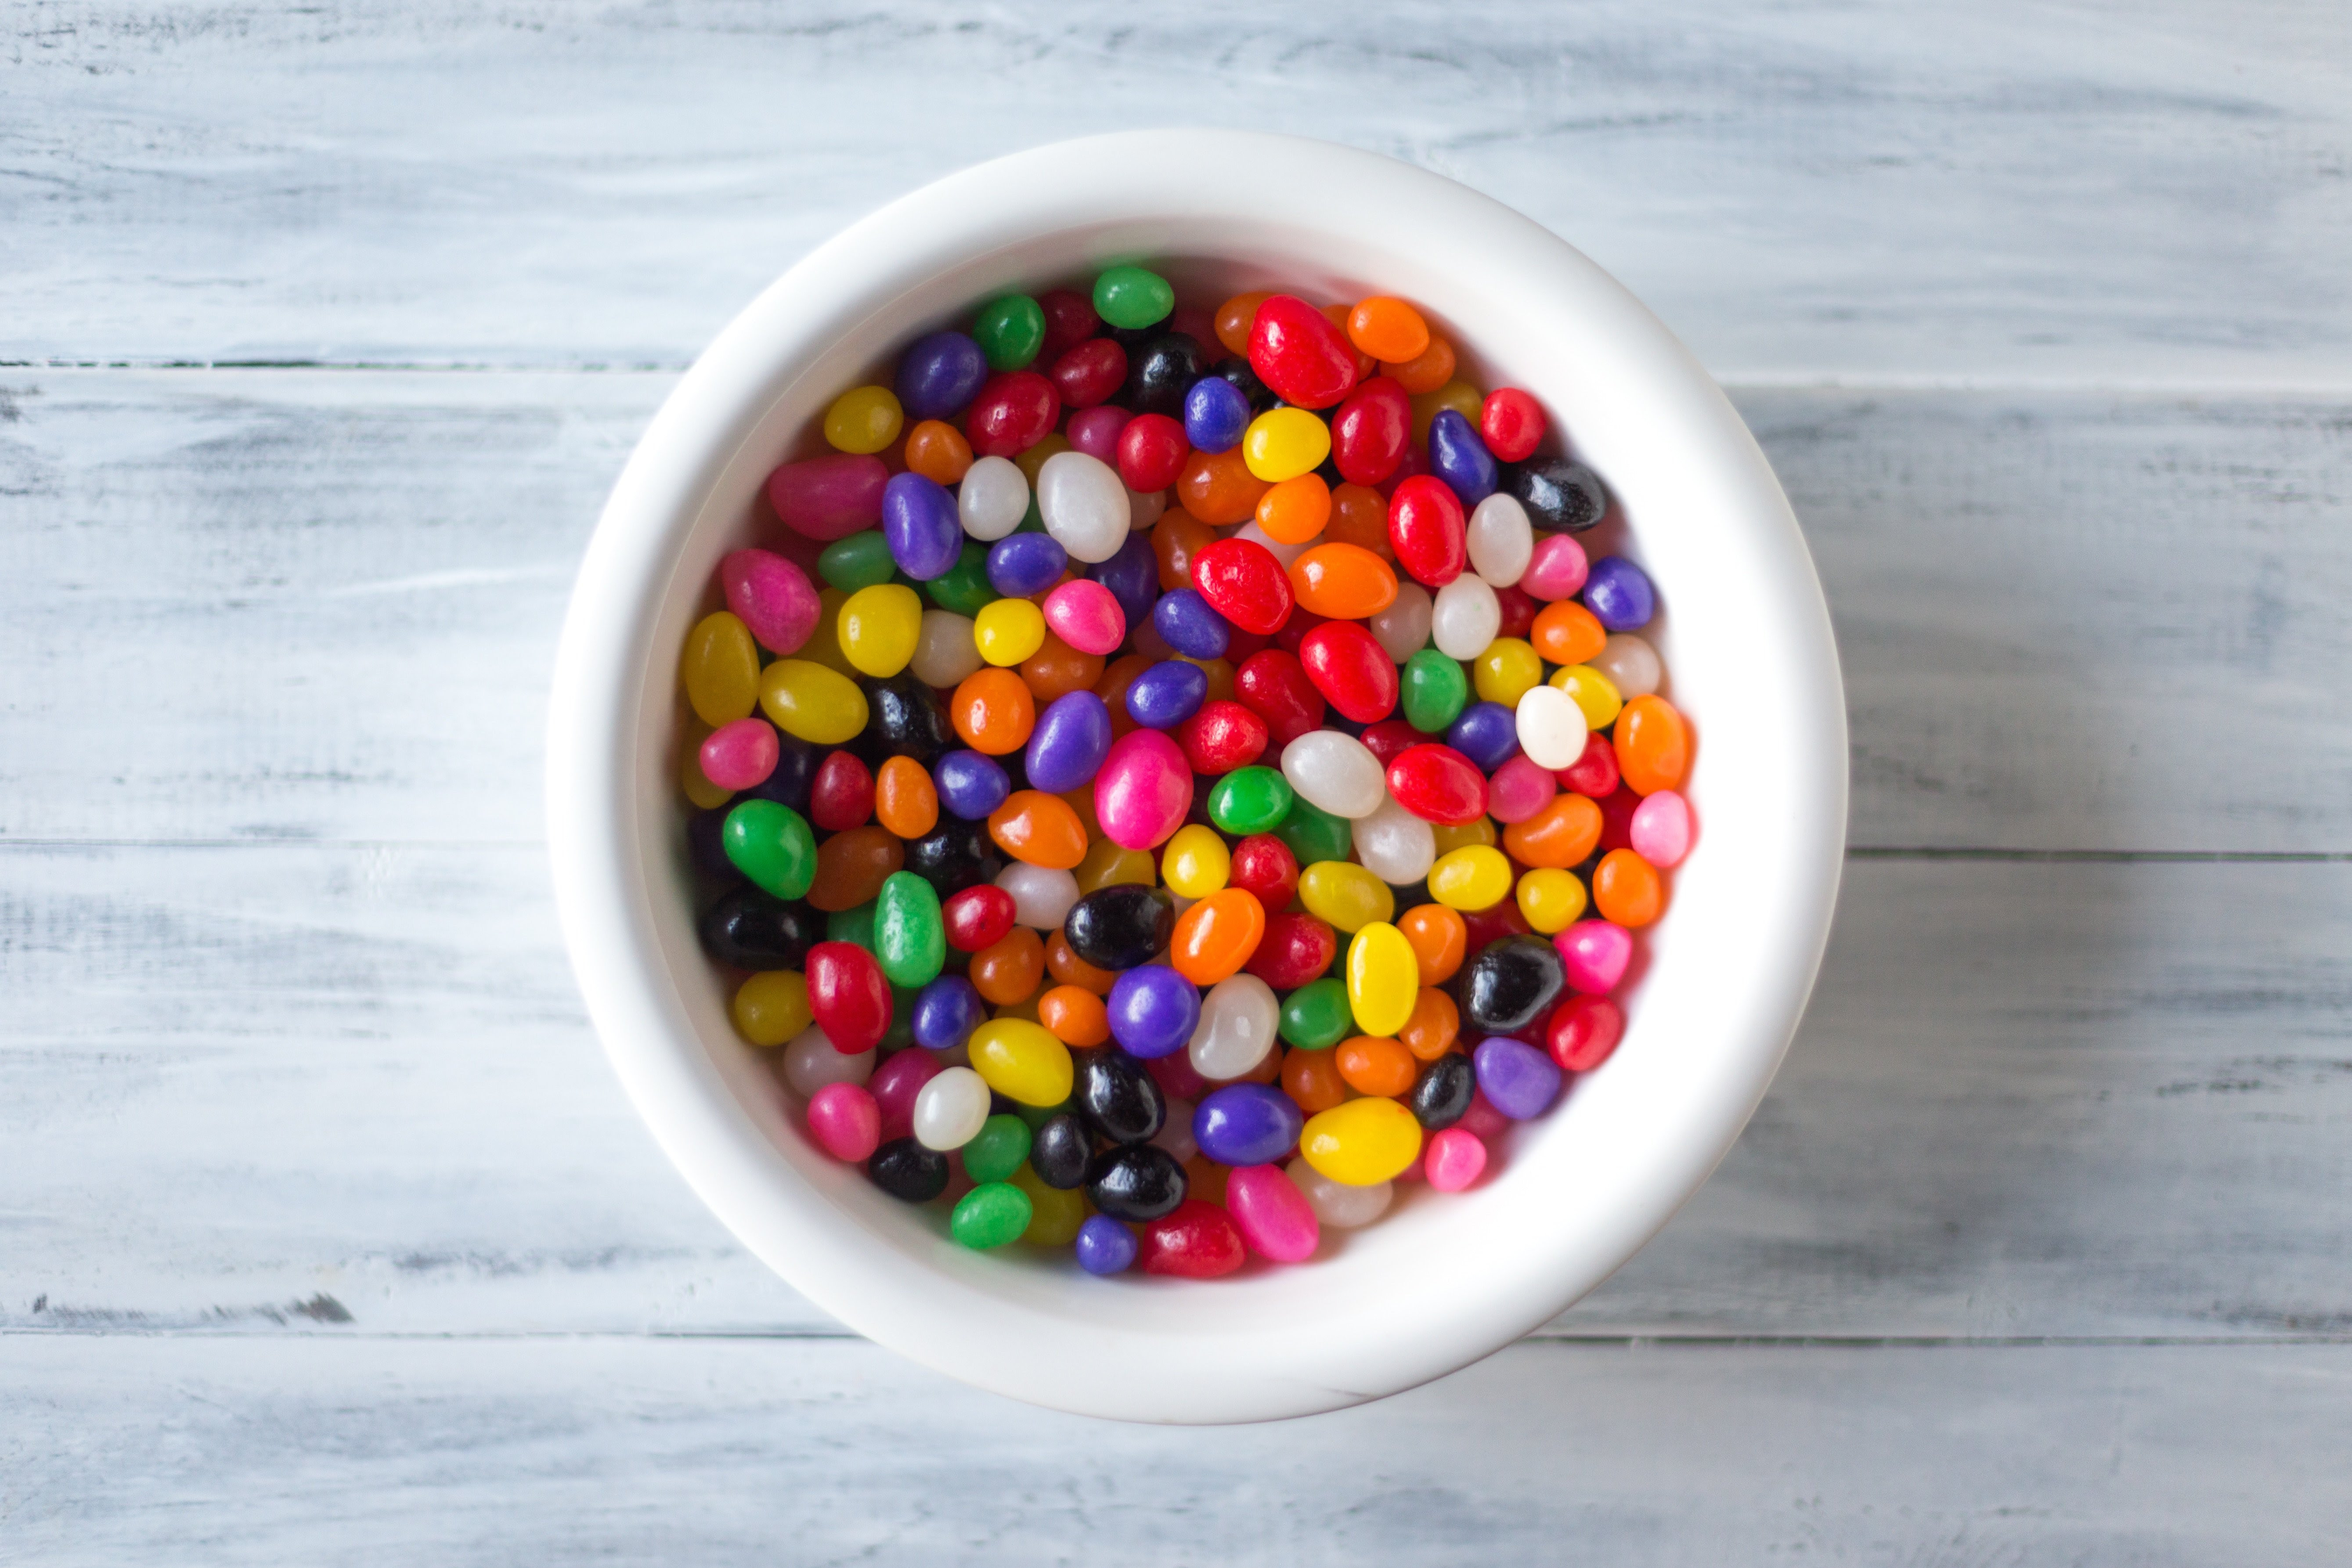 Now Watch This: The Time You Have Left (in Jellybeans)